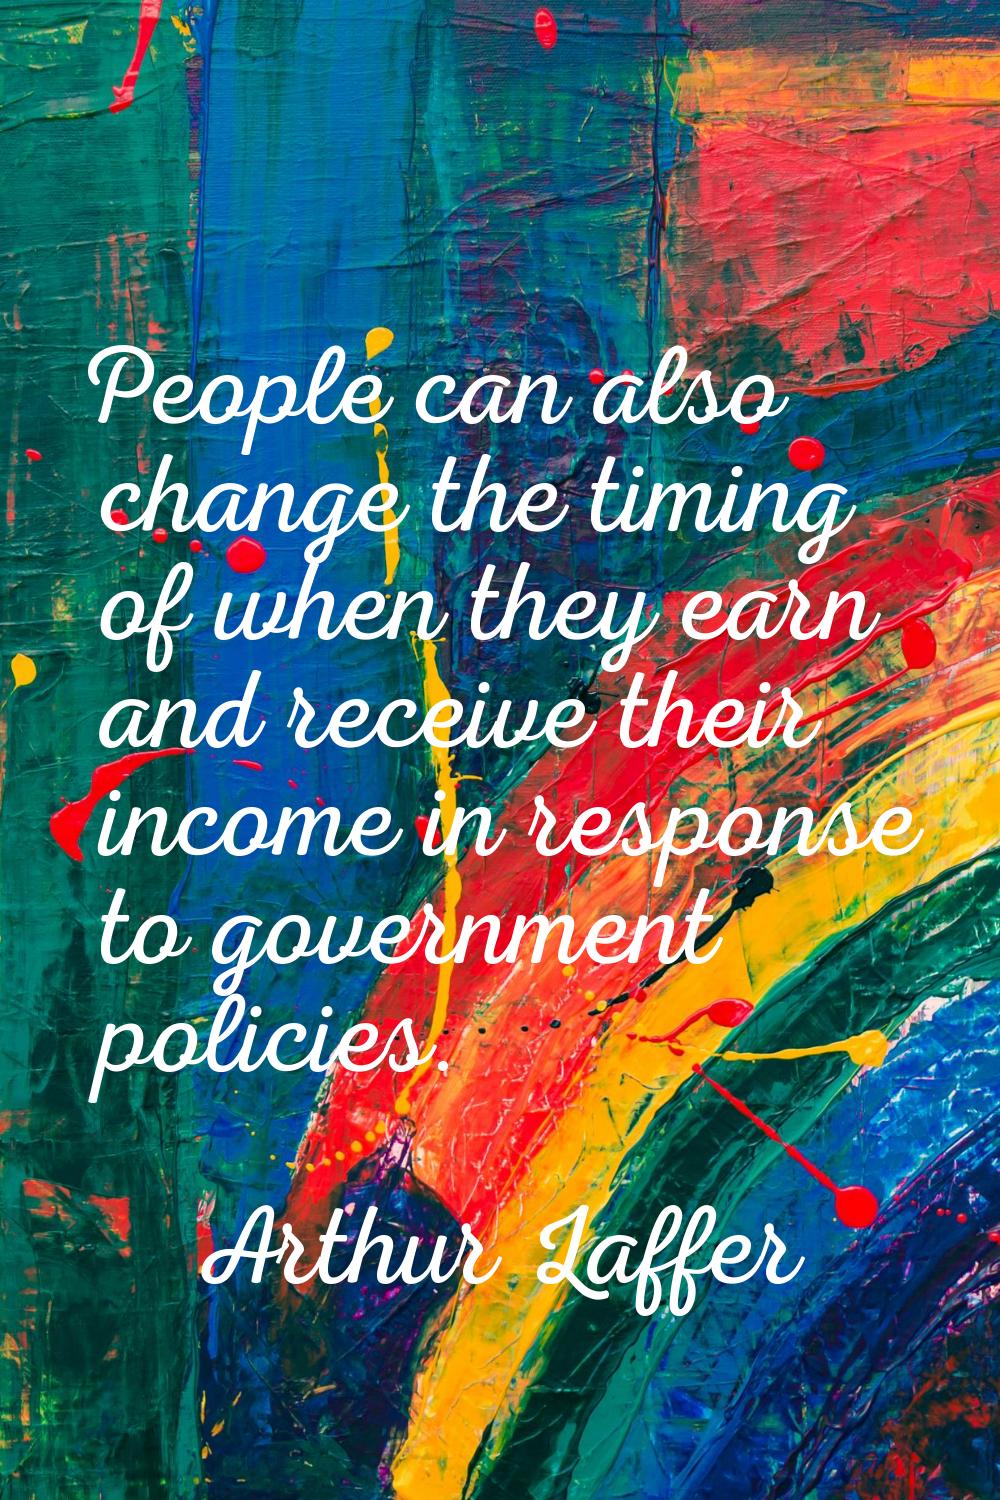 People can also change the timing of when they earn and receive their income in response to governm